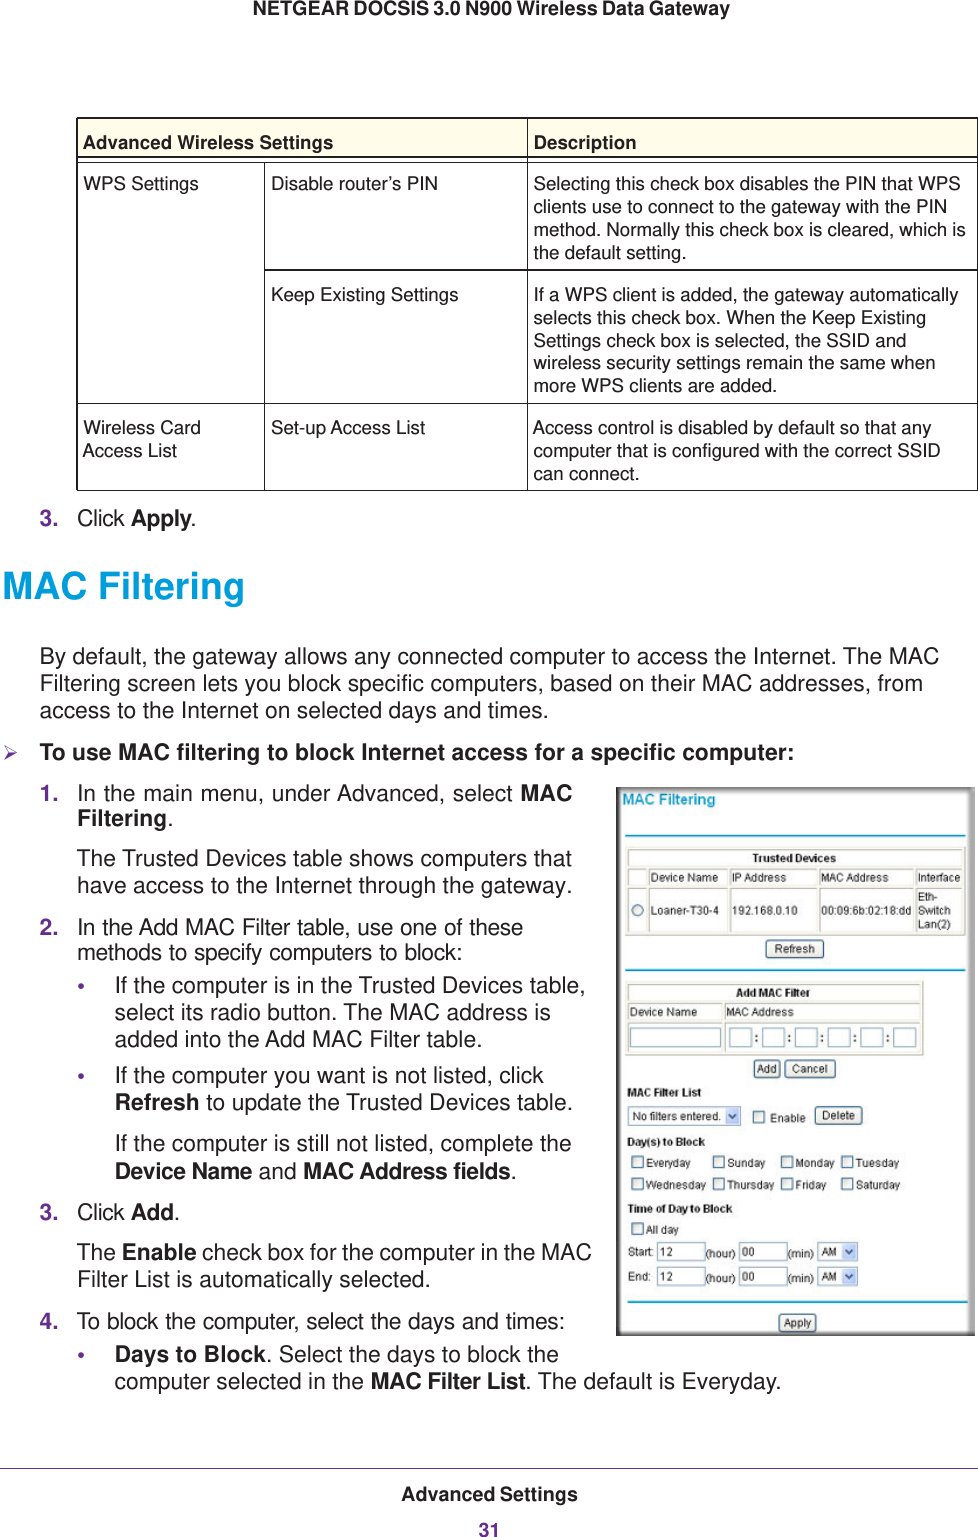 Advanced Settings31 NETGEAR DOCSIS 3.0 N900 Wireless Data Gateway3. Click Apply.MAC FilteringBy default, the gateway allows any connected computer to access the Internet. The MAC Filtering screen lets you block specific computers, based on their MAC addresses, from access to the Internet on selected days and times.To use MAC filtering to block Internet access for a specific computer:1. In the main menu, under Advanced, select MAC Filtering. The Trusted Devices table shows computers that have access to the Internet through the gateway. 2. In the Add MAC Filter table, use one of these methods to specify computers to block:•If the computer is in the Trusted Devices table, select its radio button. The MAC address is added into the Add MAC Filter table.•If the computer you want is not listed, click Refresh to update the Trusted Devices table.If the computer is still not listed, complete the Device Name and MAC Address fields.3. Click Add. The Enable check box for the computer in the MAC Filter List is automatically selected.4. To block the computer, select the days and times:•Days to Block. Select the days to block the computer selected in the MAC Filter List. The default is Everyday.WPS Settings Disable router’s PIN Selecting this check box disables the PIN that WPS clients use to connect to the gateway with the PIN method. Normally this check box is cleared, which is the default setting.Keep Existing Settings If a WPS client is added, the gateway automatically selects this check box. When the Keep Existing Settings check box is selected, the SSID and wireless security settings remain the same when more WPS clients are added.Wireless Card Access ListSet-up Access List Access control is disabled by default so that any computer that is configured with the correct SSID can connect.Advanced Wireless Settings Description